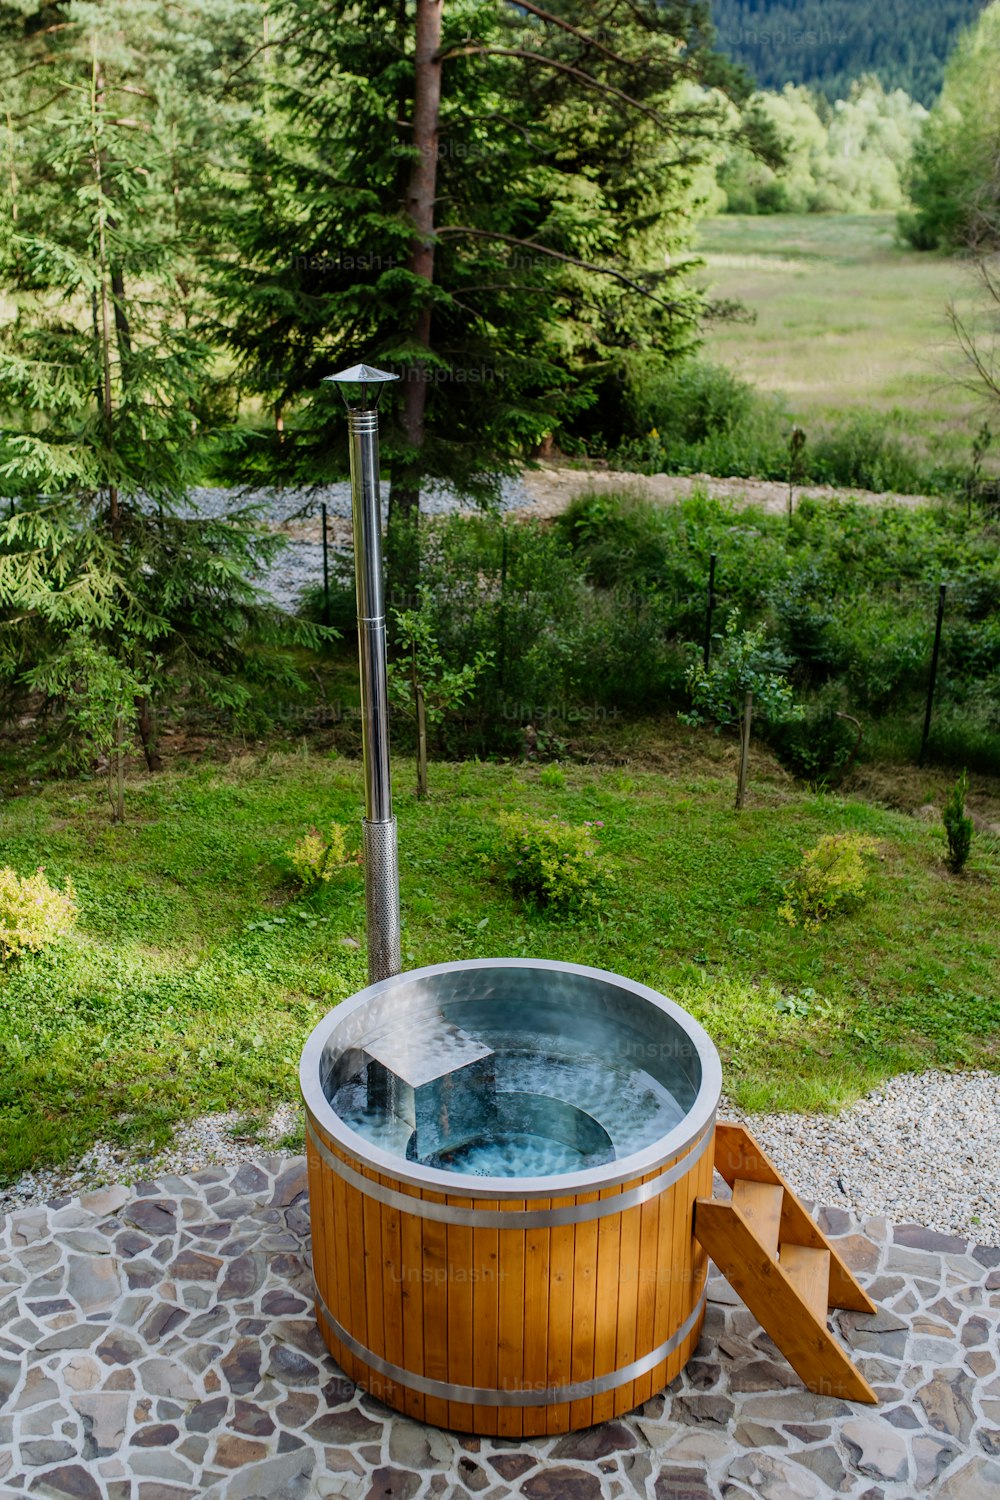 A wooden bathtub with a fireplace to burn wood and heat water in backyard in mountains.